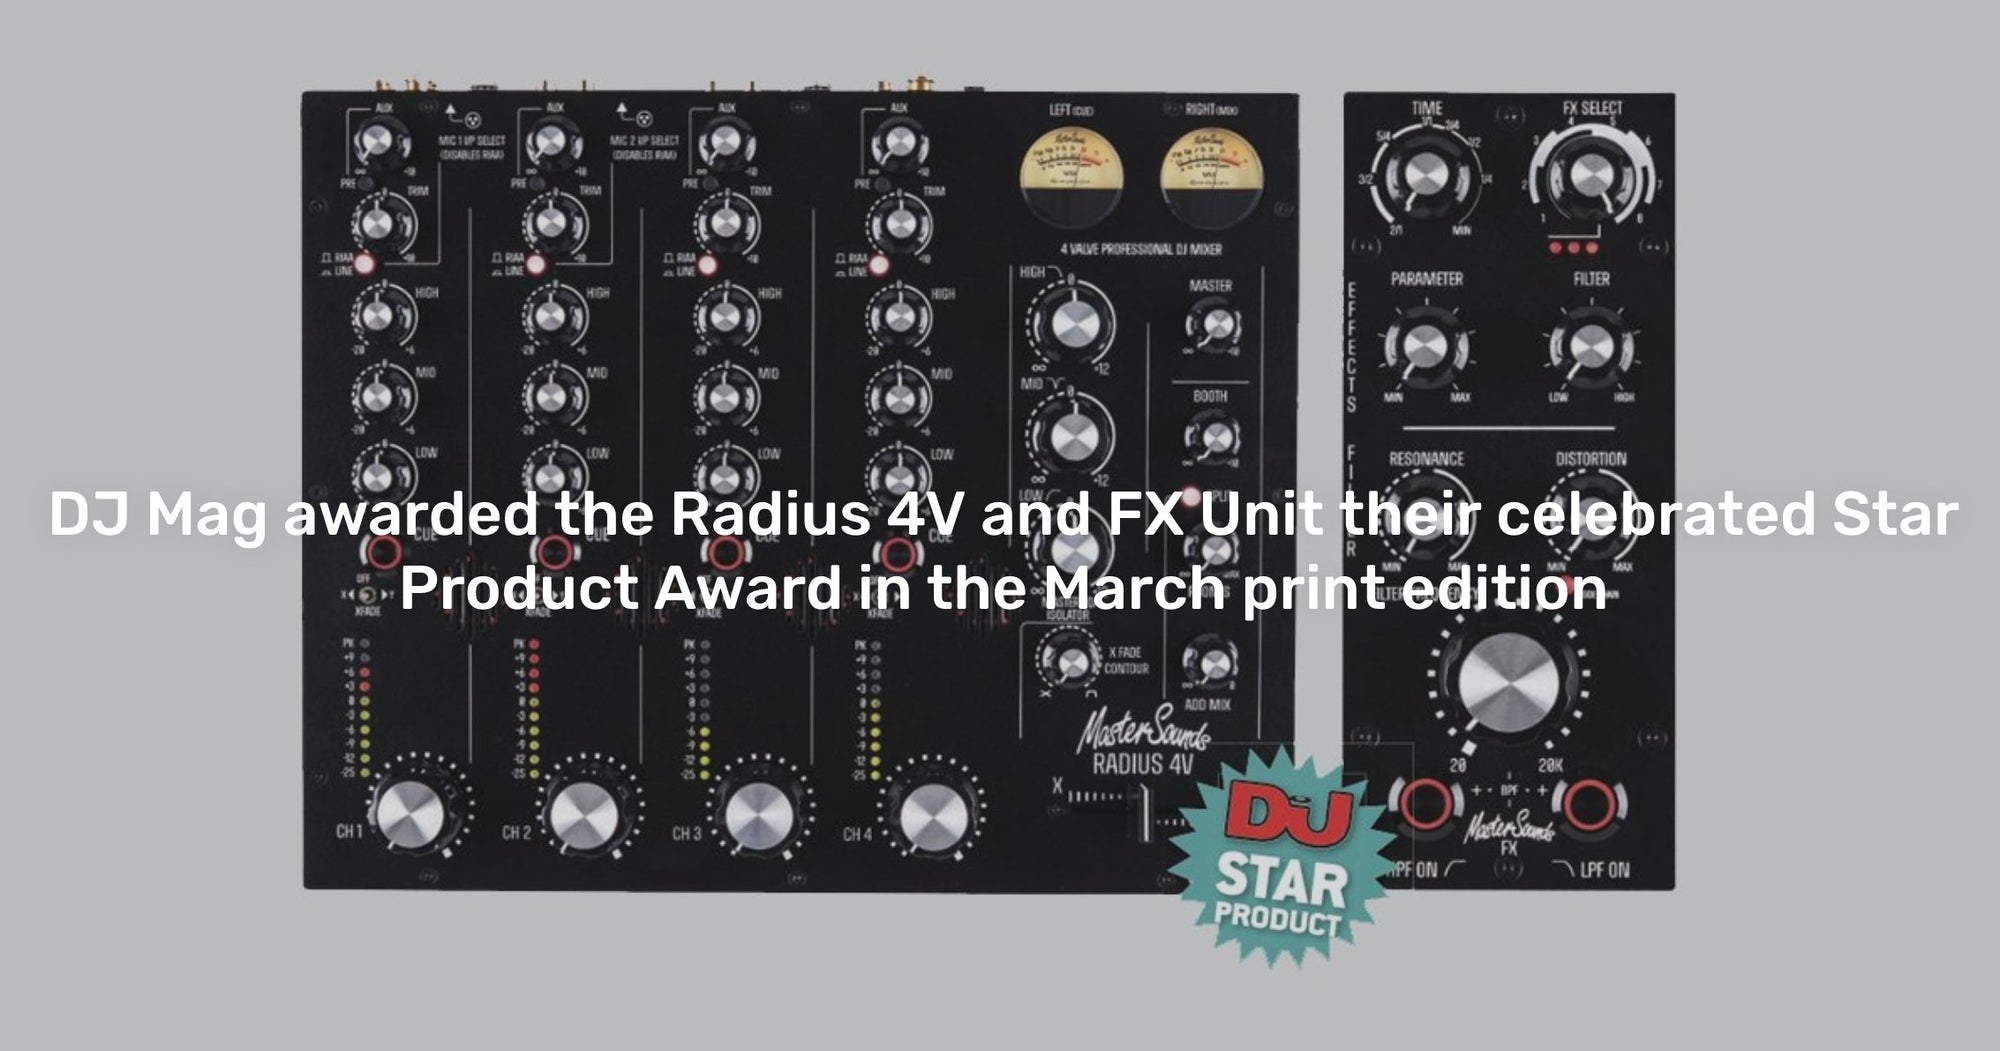 DJ Mag awarded the Radius 4V and FX Unit their Star Product Award - MasterSounds